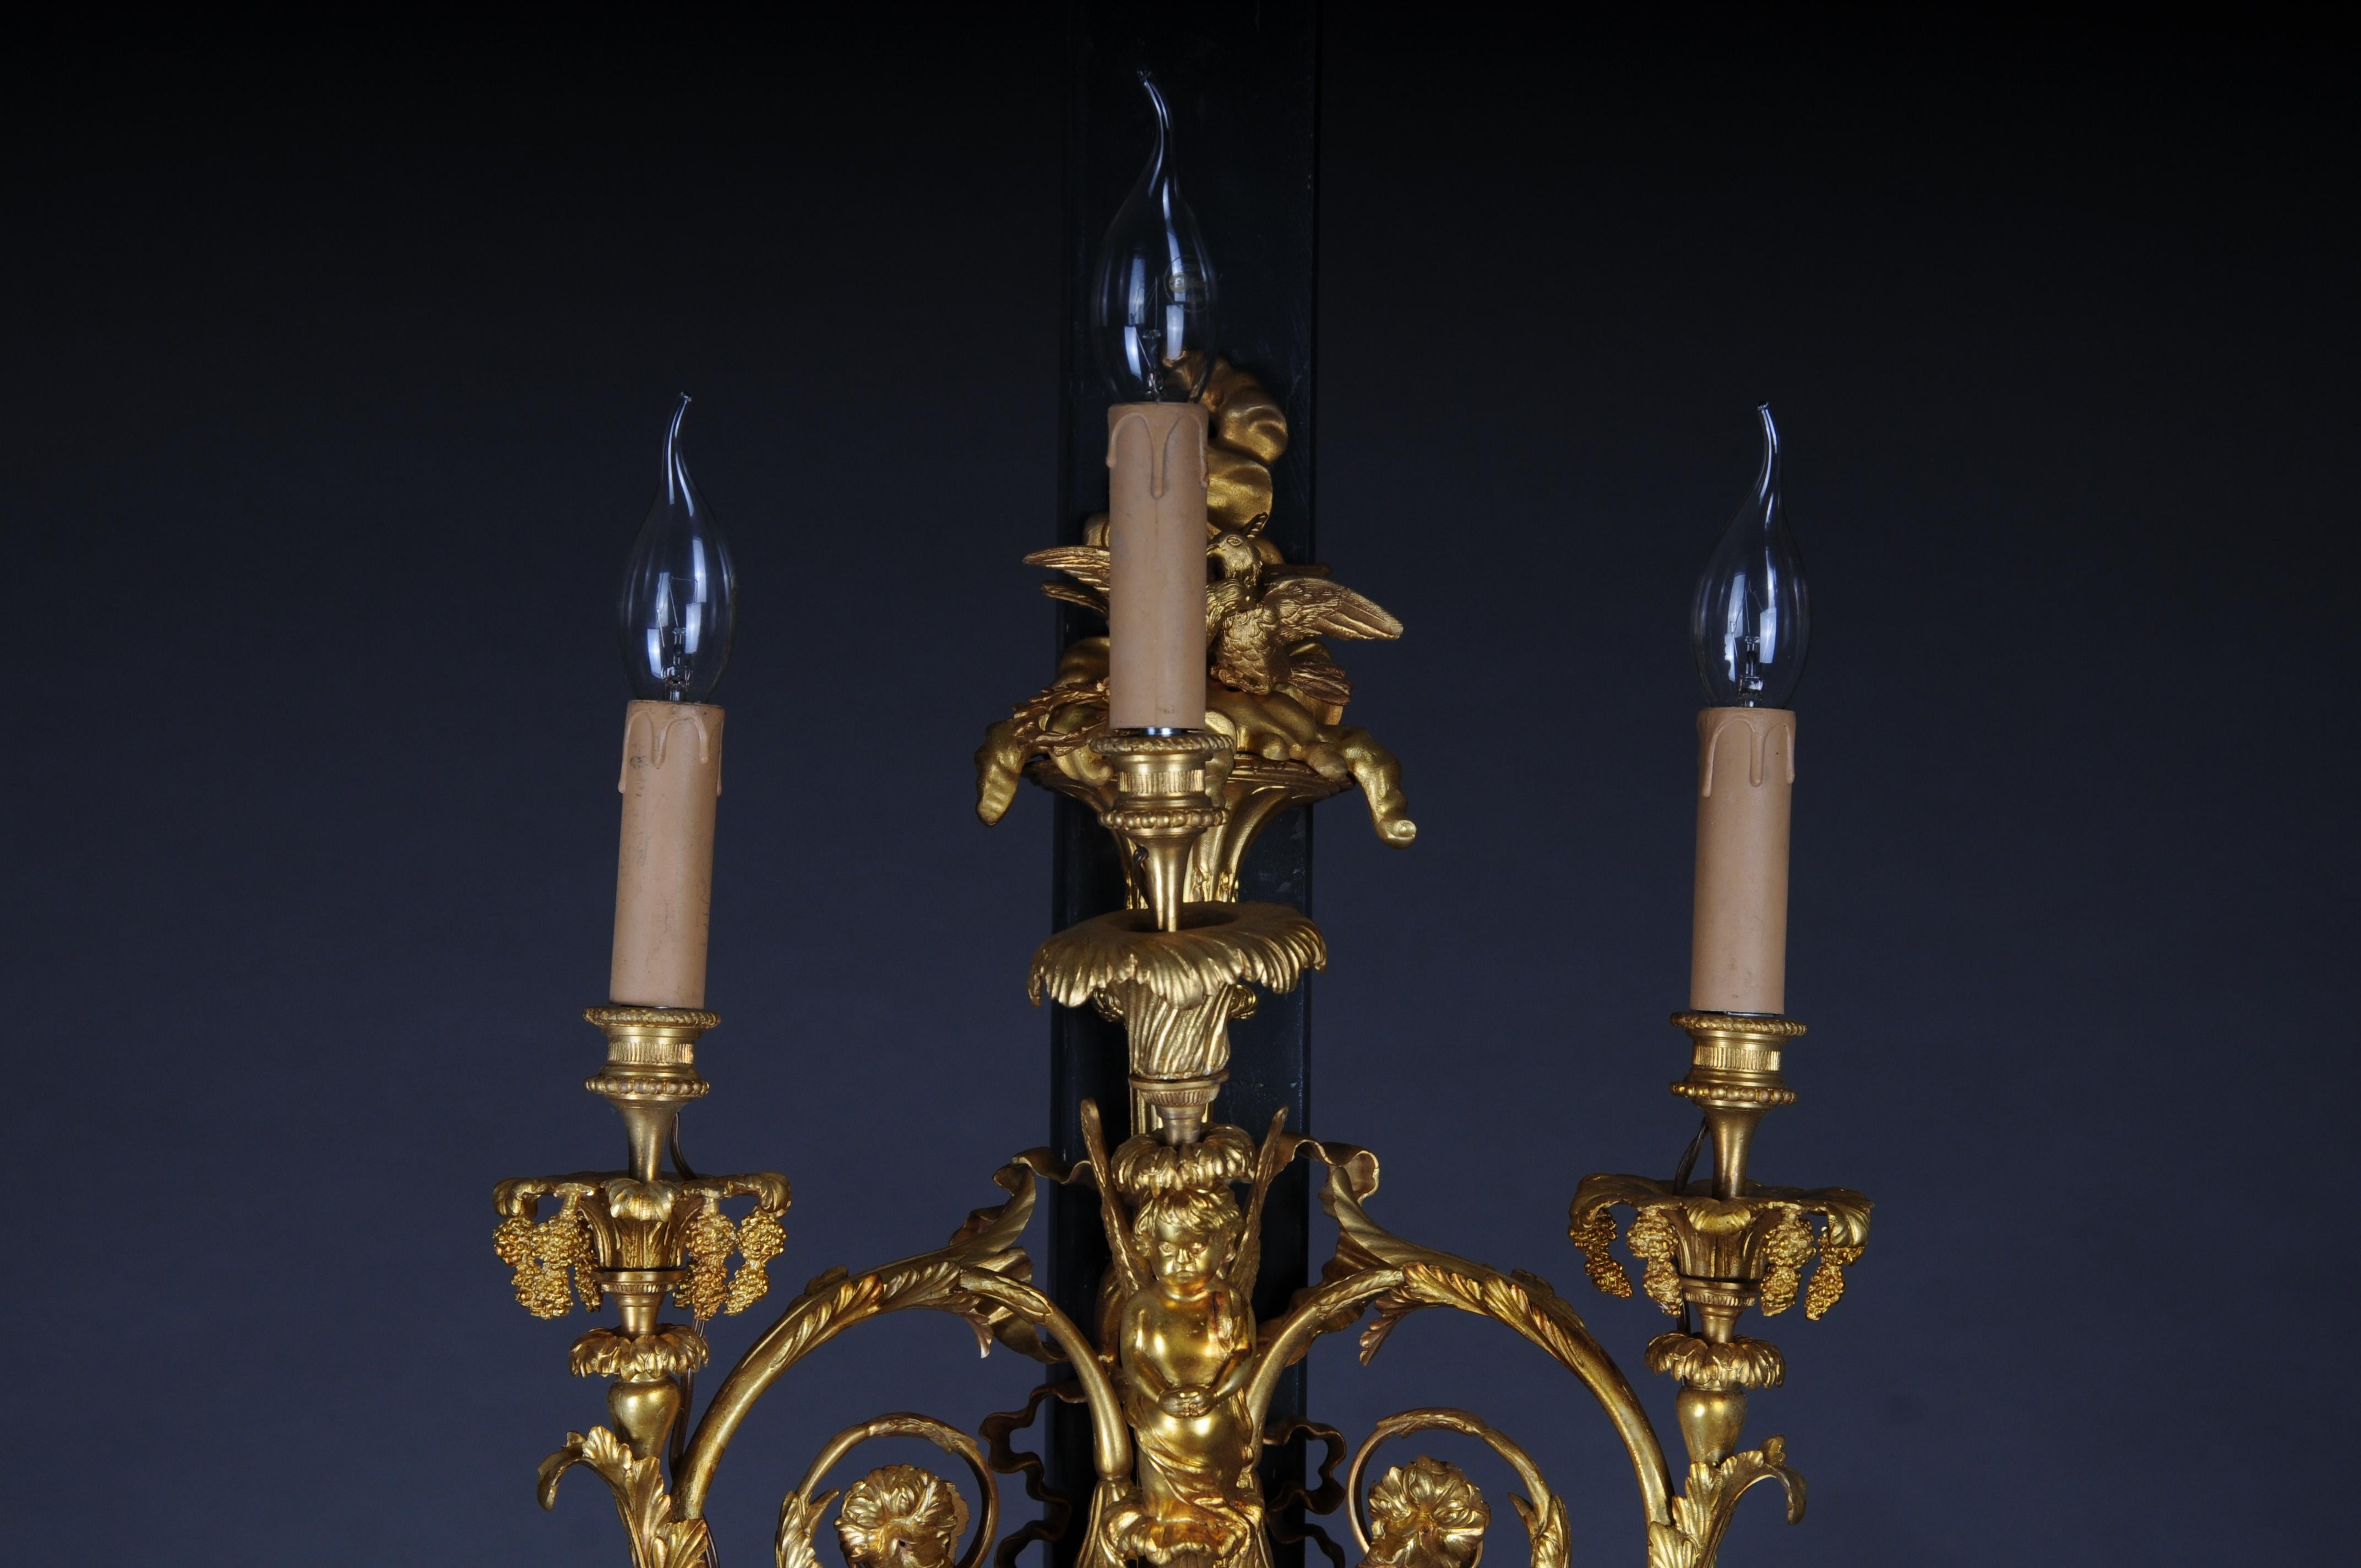 Pair of (2) bronze magnificent sconces, gilded in Louis XV

Matt and gilded, chased bronze. Wall sconce richly ornate and spiraled, crowned with doves, acanthus decor and grape-like finish, as well as 3 curved light arms. The sconces are already